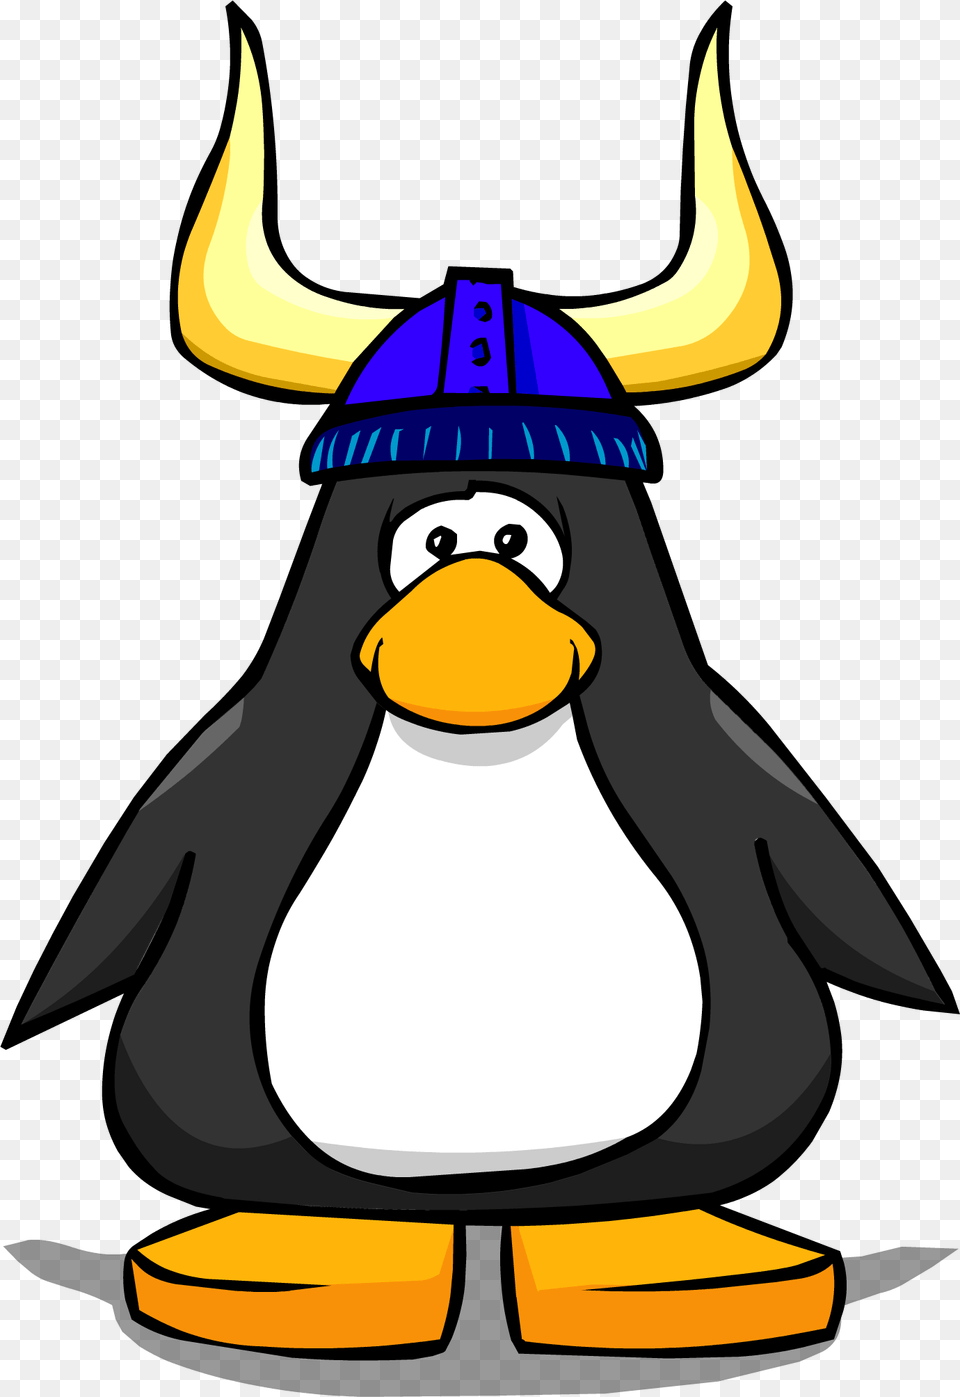 Blue Viking Helmet Player Card Penguin With A Horn, Animal, Bird, Nature, Outdoors Png Image